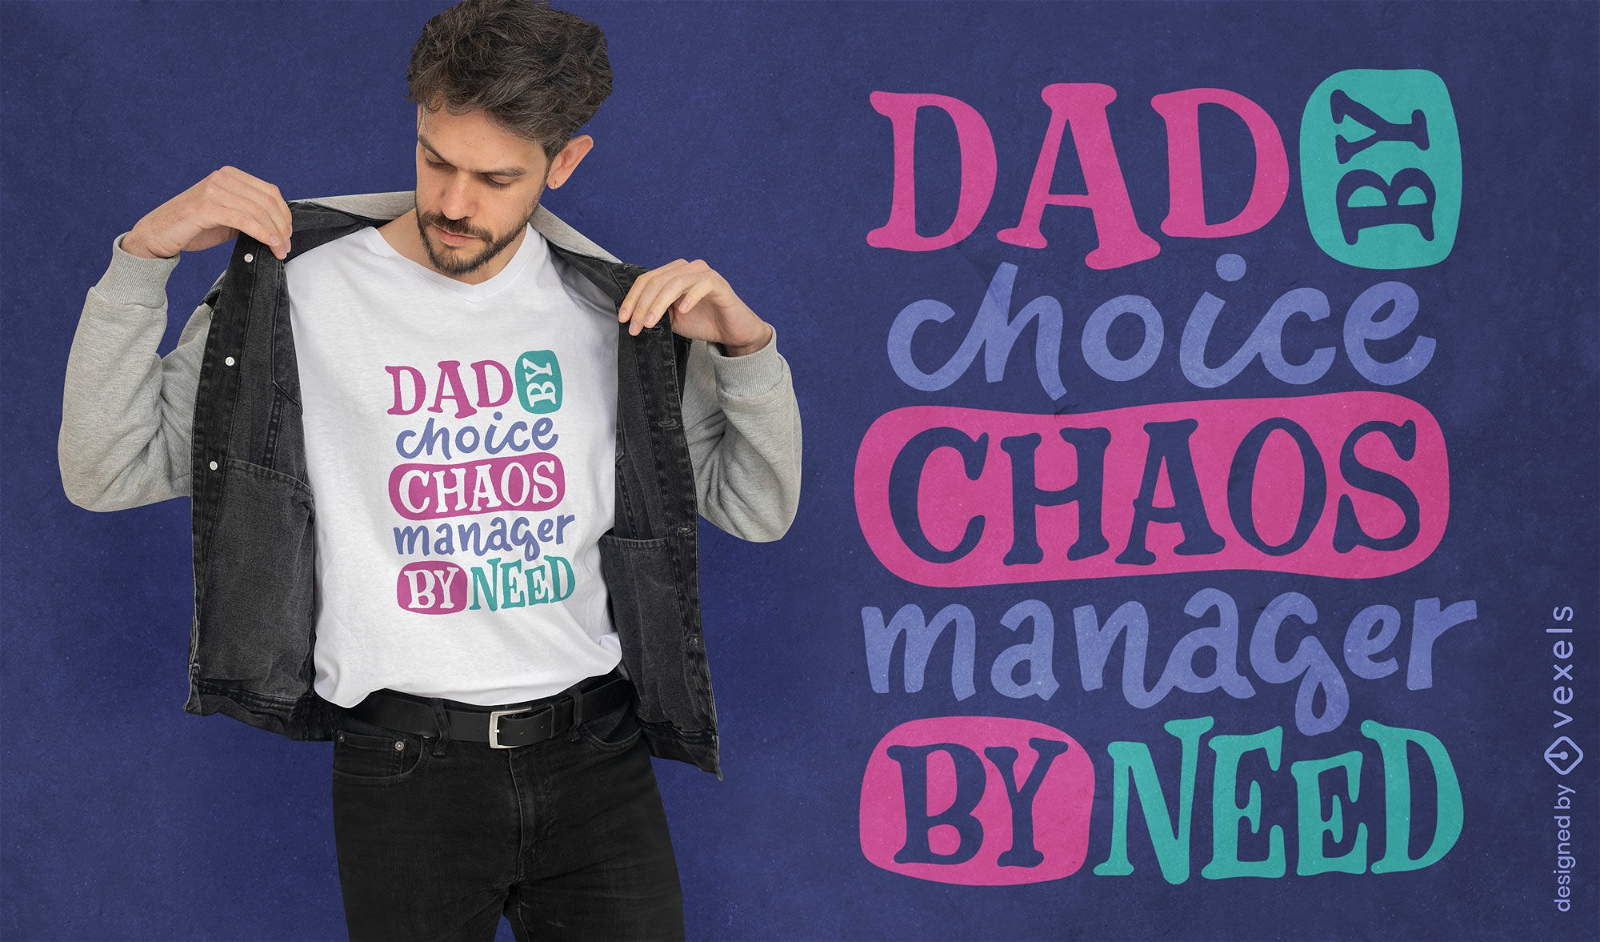 Funny dad quote t-shirt design